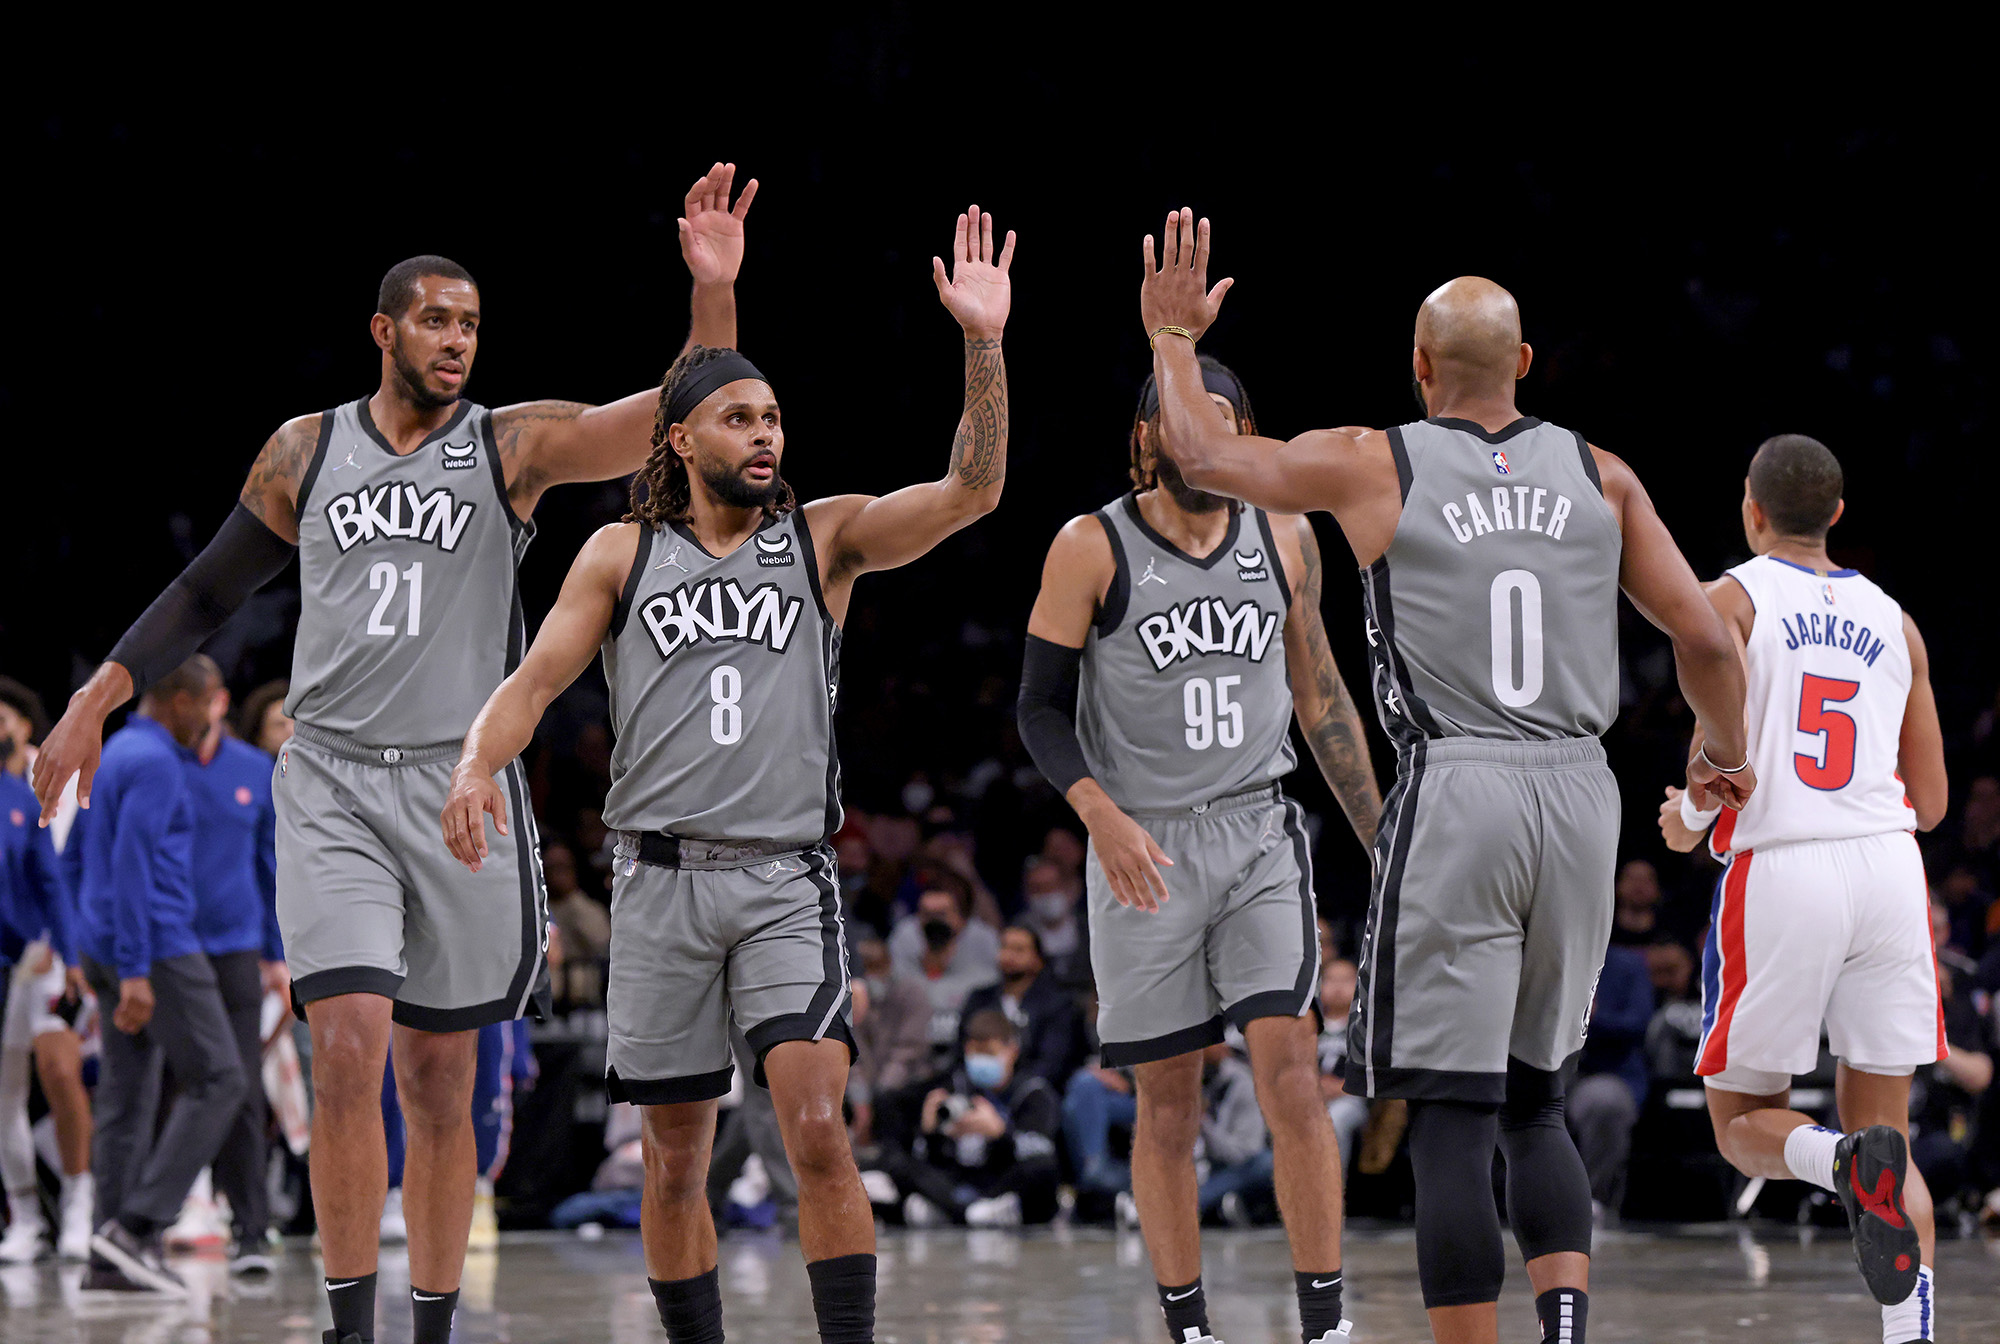 Nets head coach Steve Nash surrounded LaMarcus Aldridge (21) with a small ball lineup including Patty Mills (8), Jevon Carter (0) and Deandre' Bembry (95) during the Nets' 117-91 rout of the Pistons Sunday.